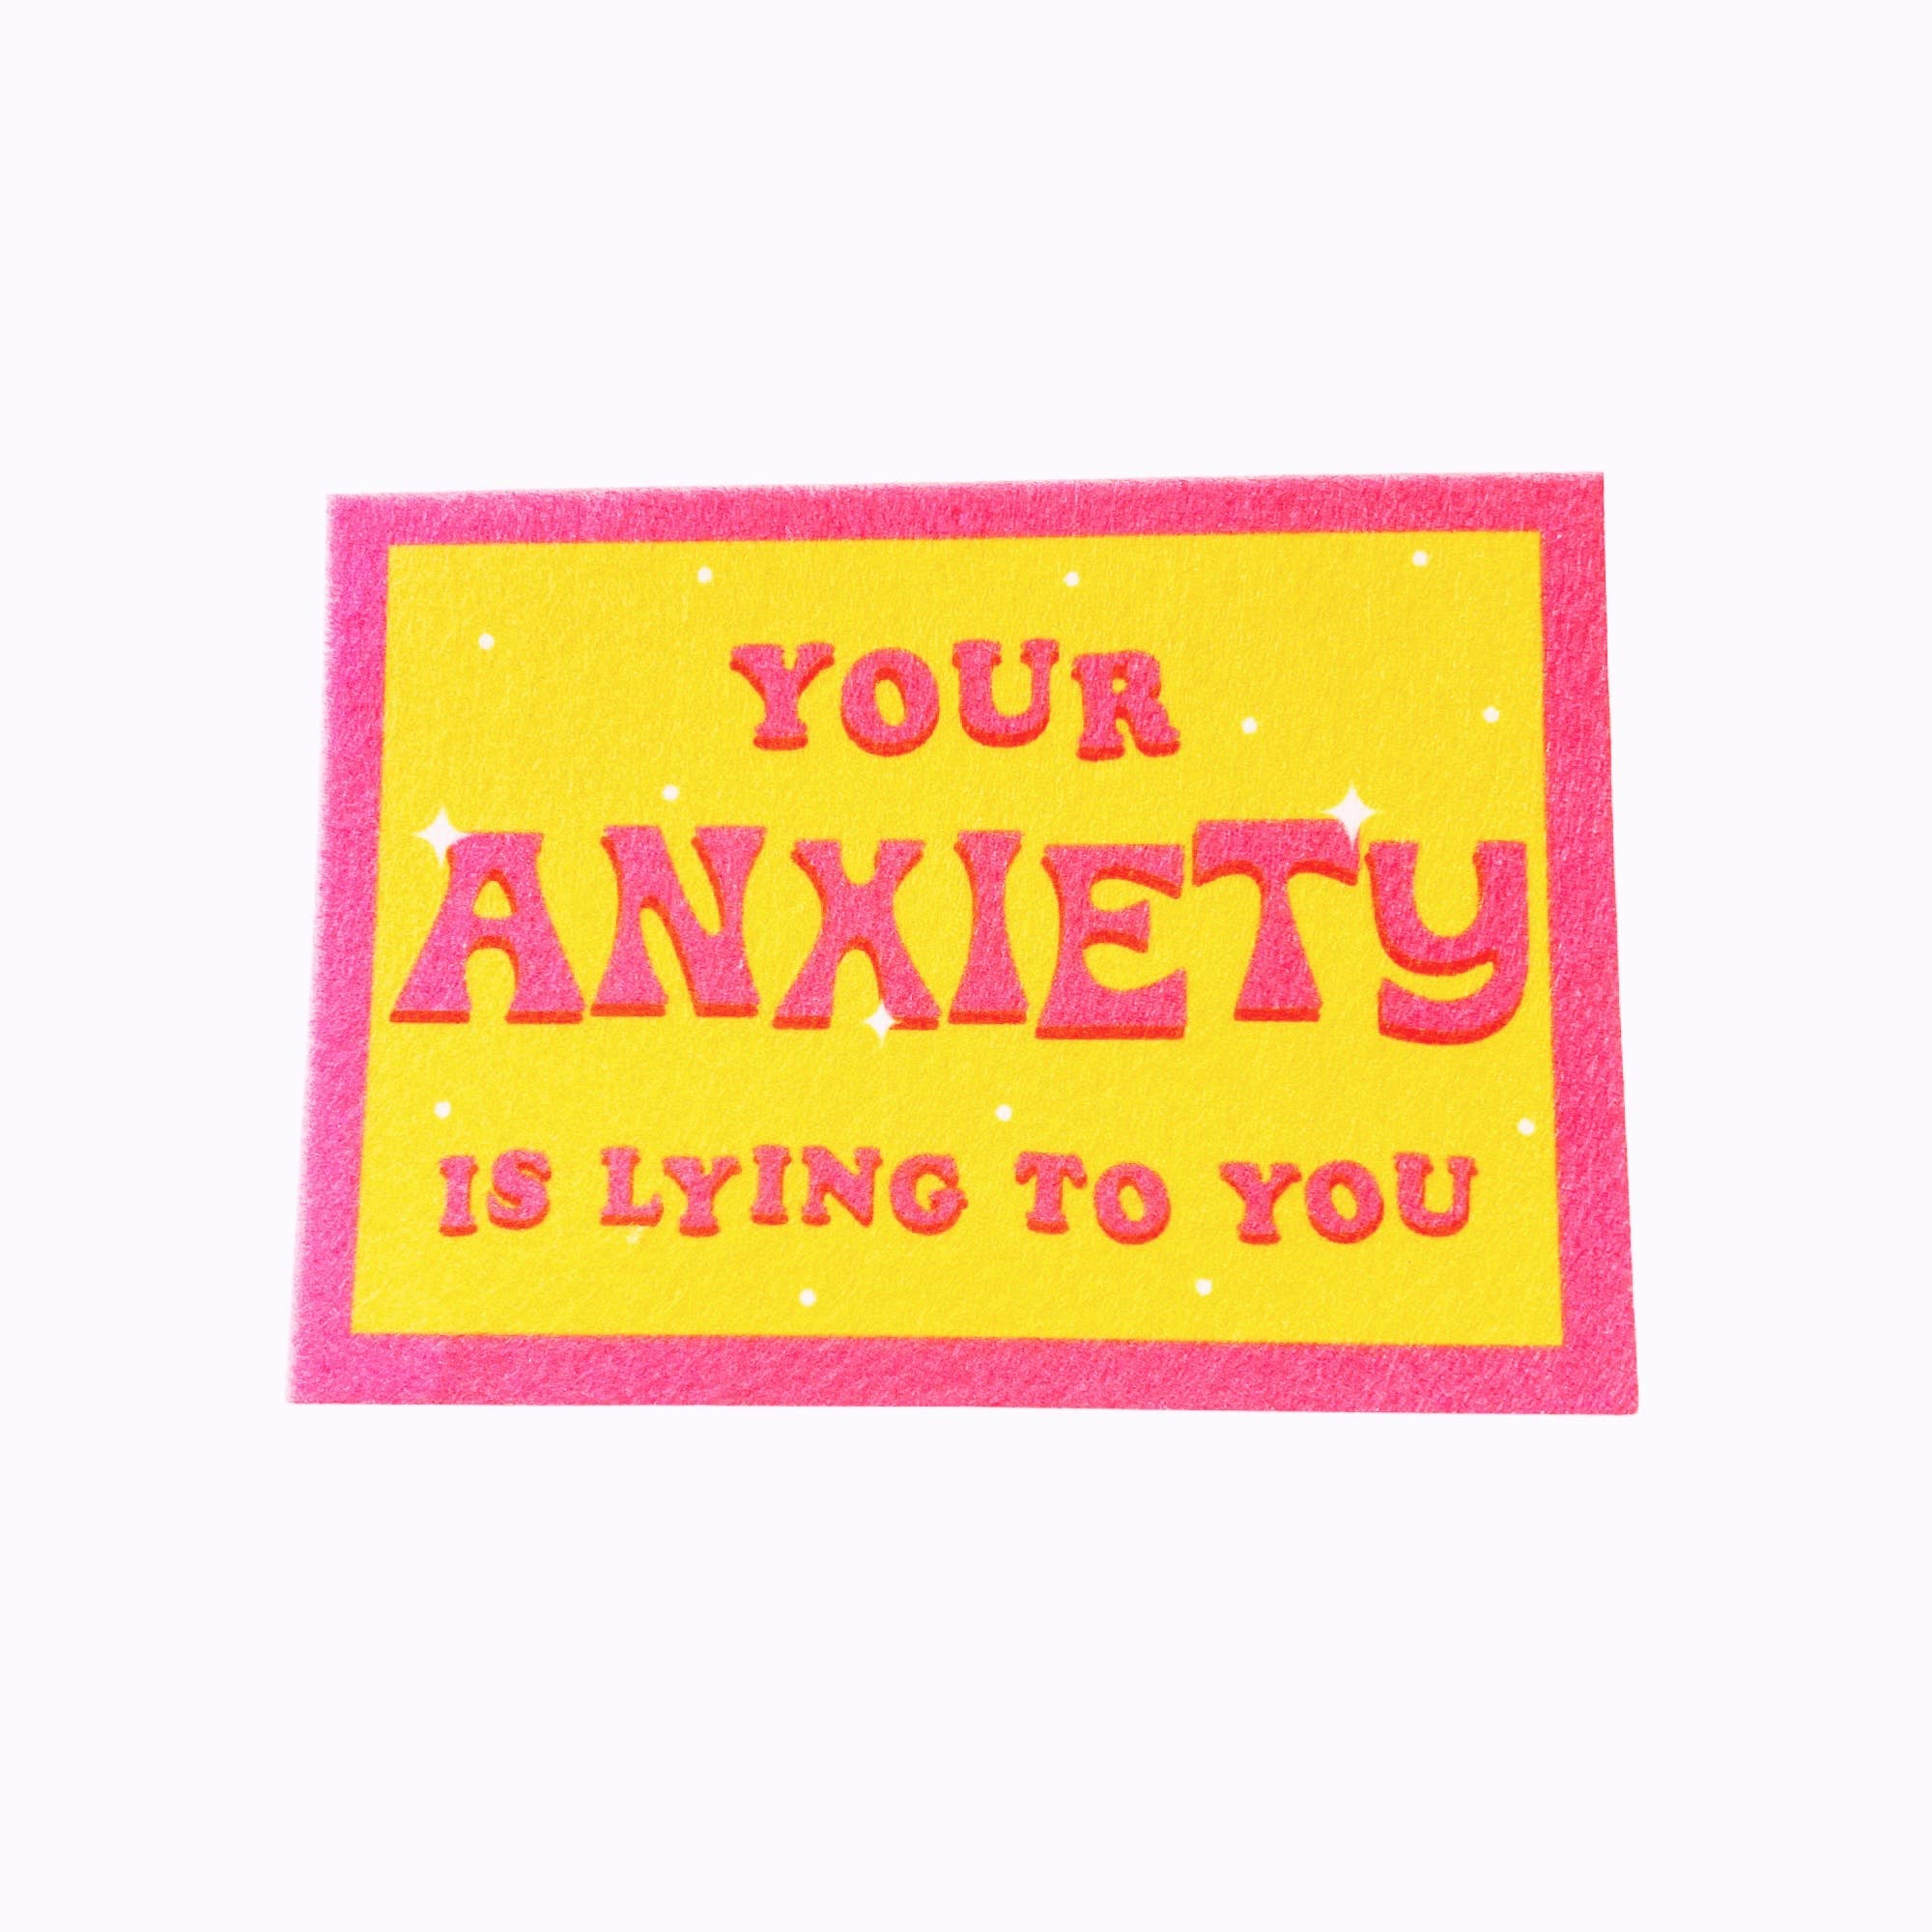 FUN CLUB - Your Anxiety is Lying to You Banner(wall art, desk reminder)